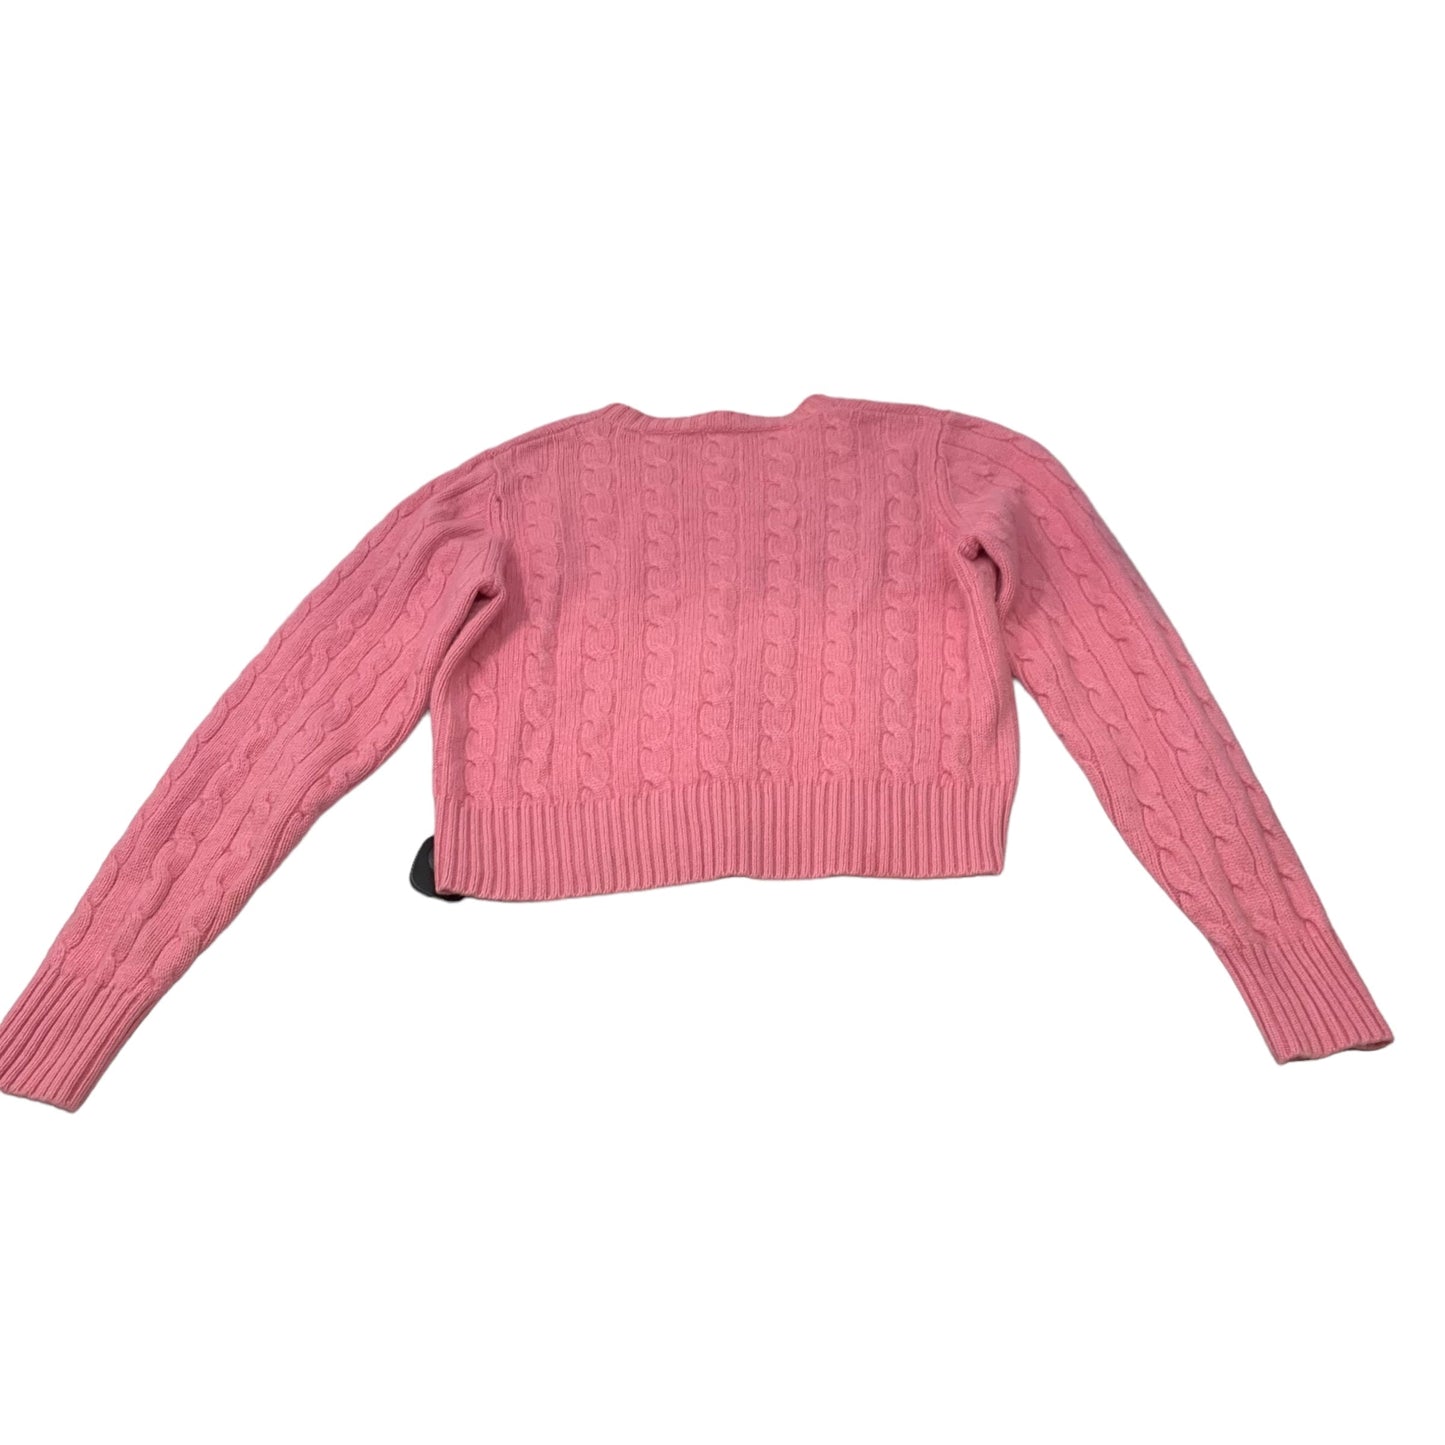 Sweater By Harolds  Size: Xl